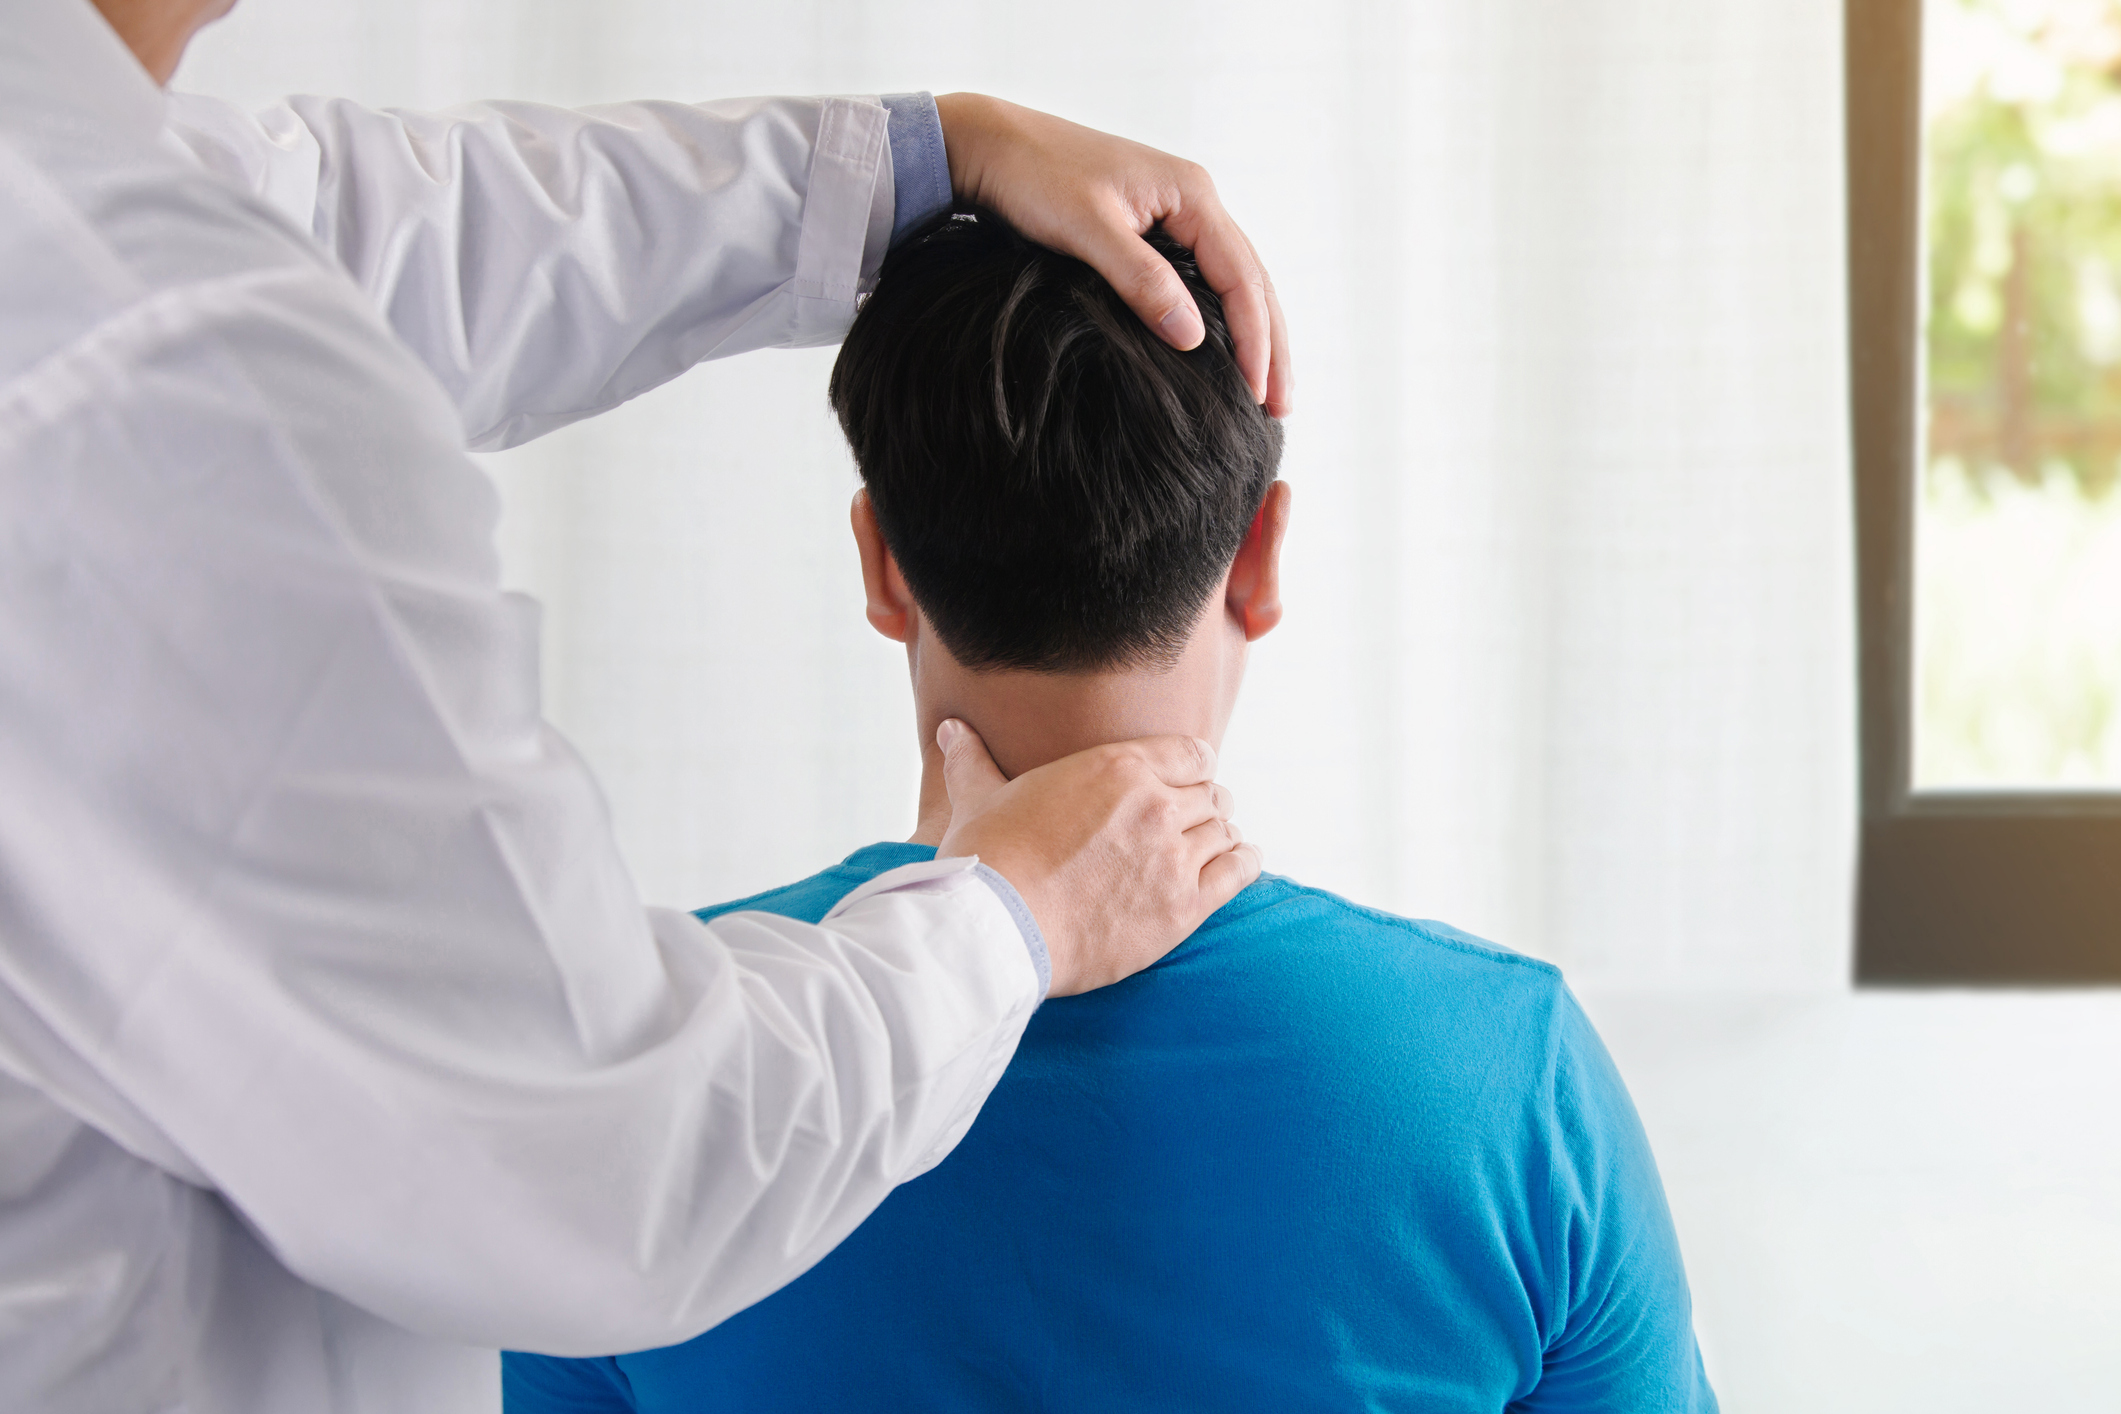 Why Doctors May Recommend Physical Therapy for Neck Pain